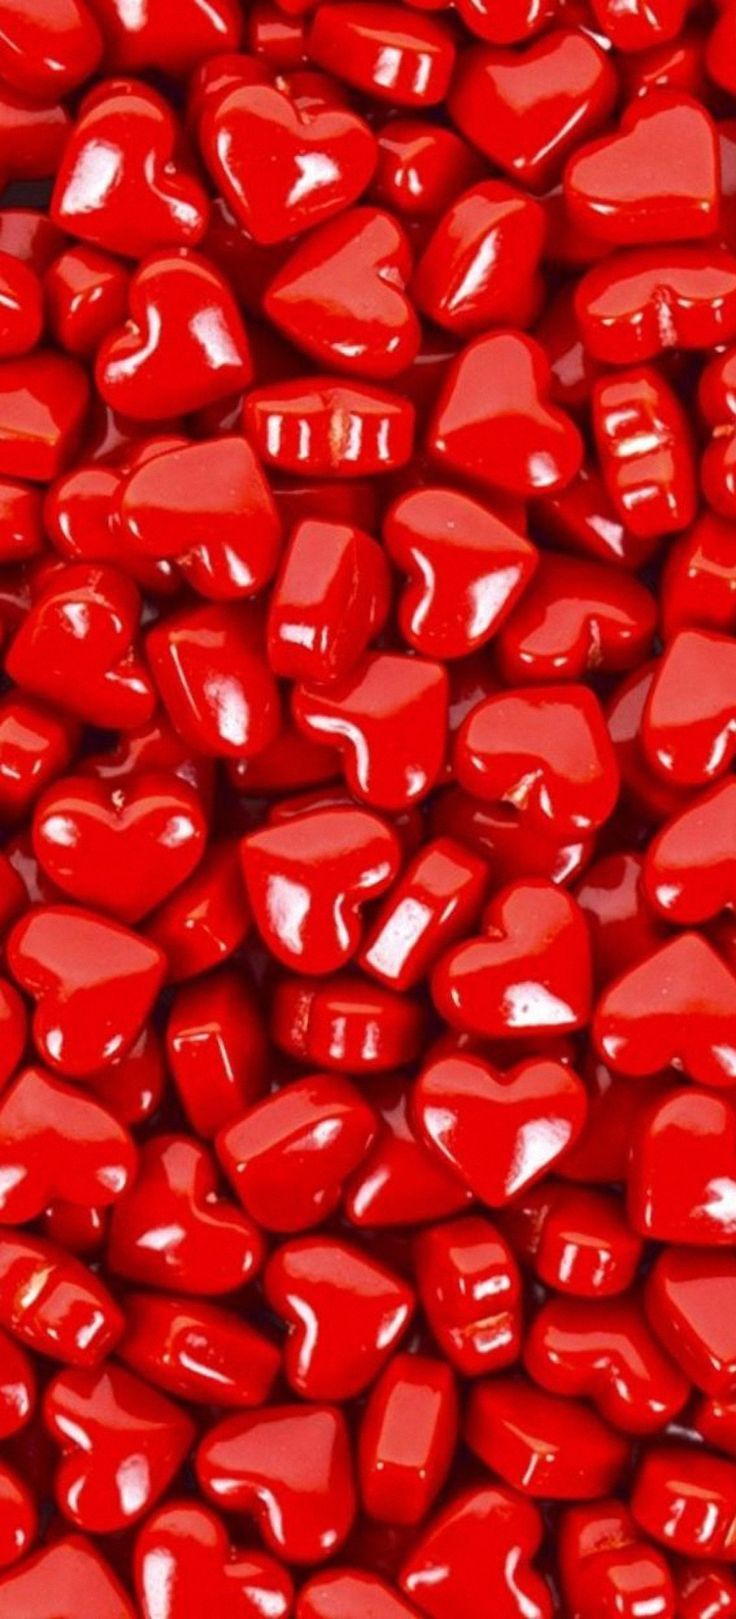 candy heart phone wallpaper red background. Heart candy, Phone wallpaper, Red background